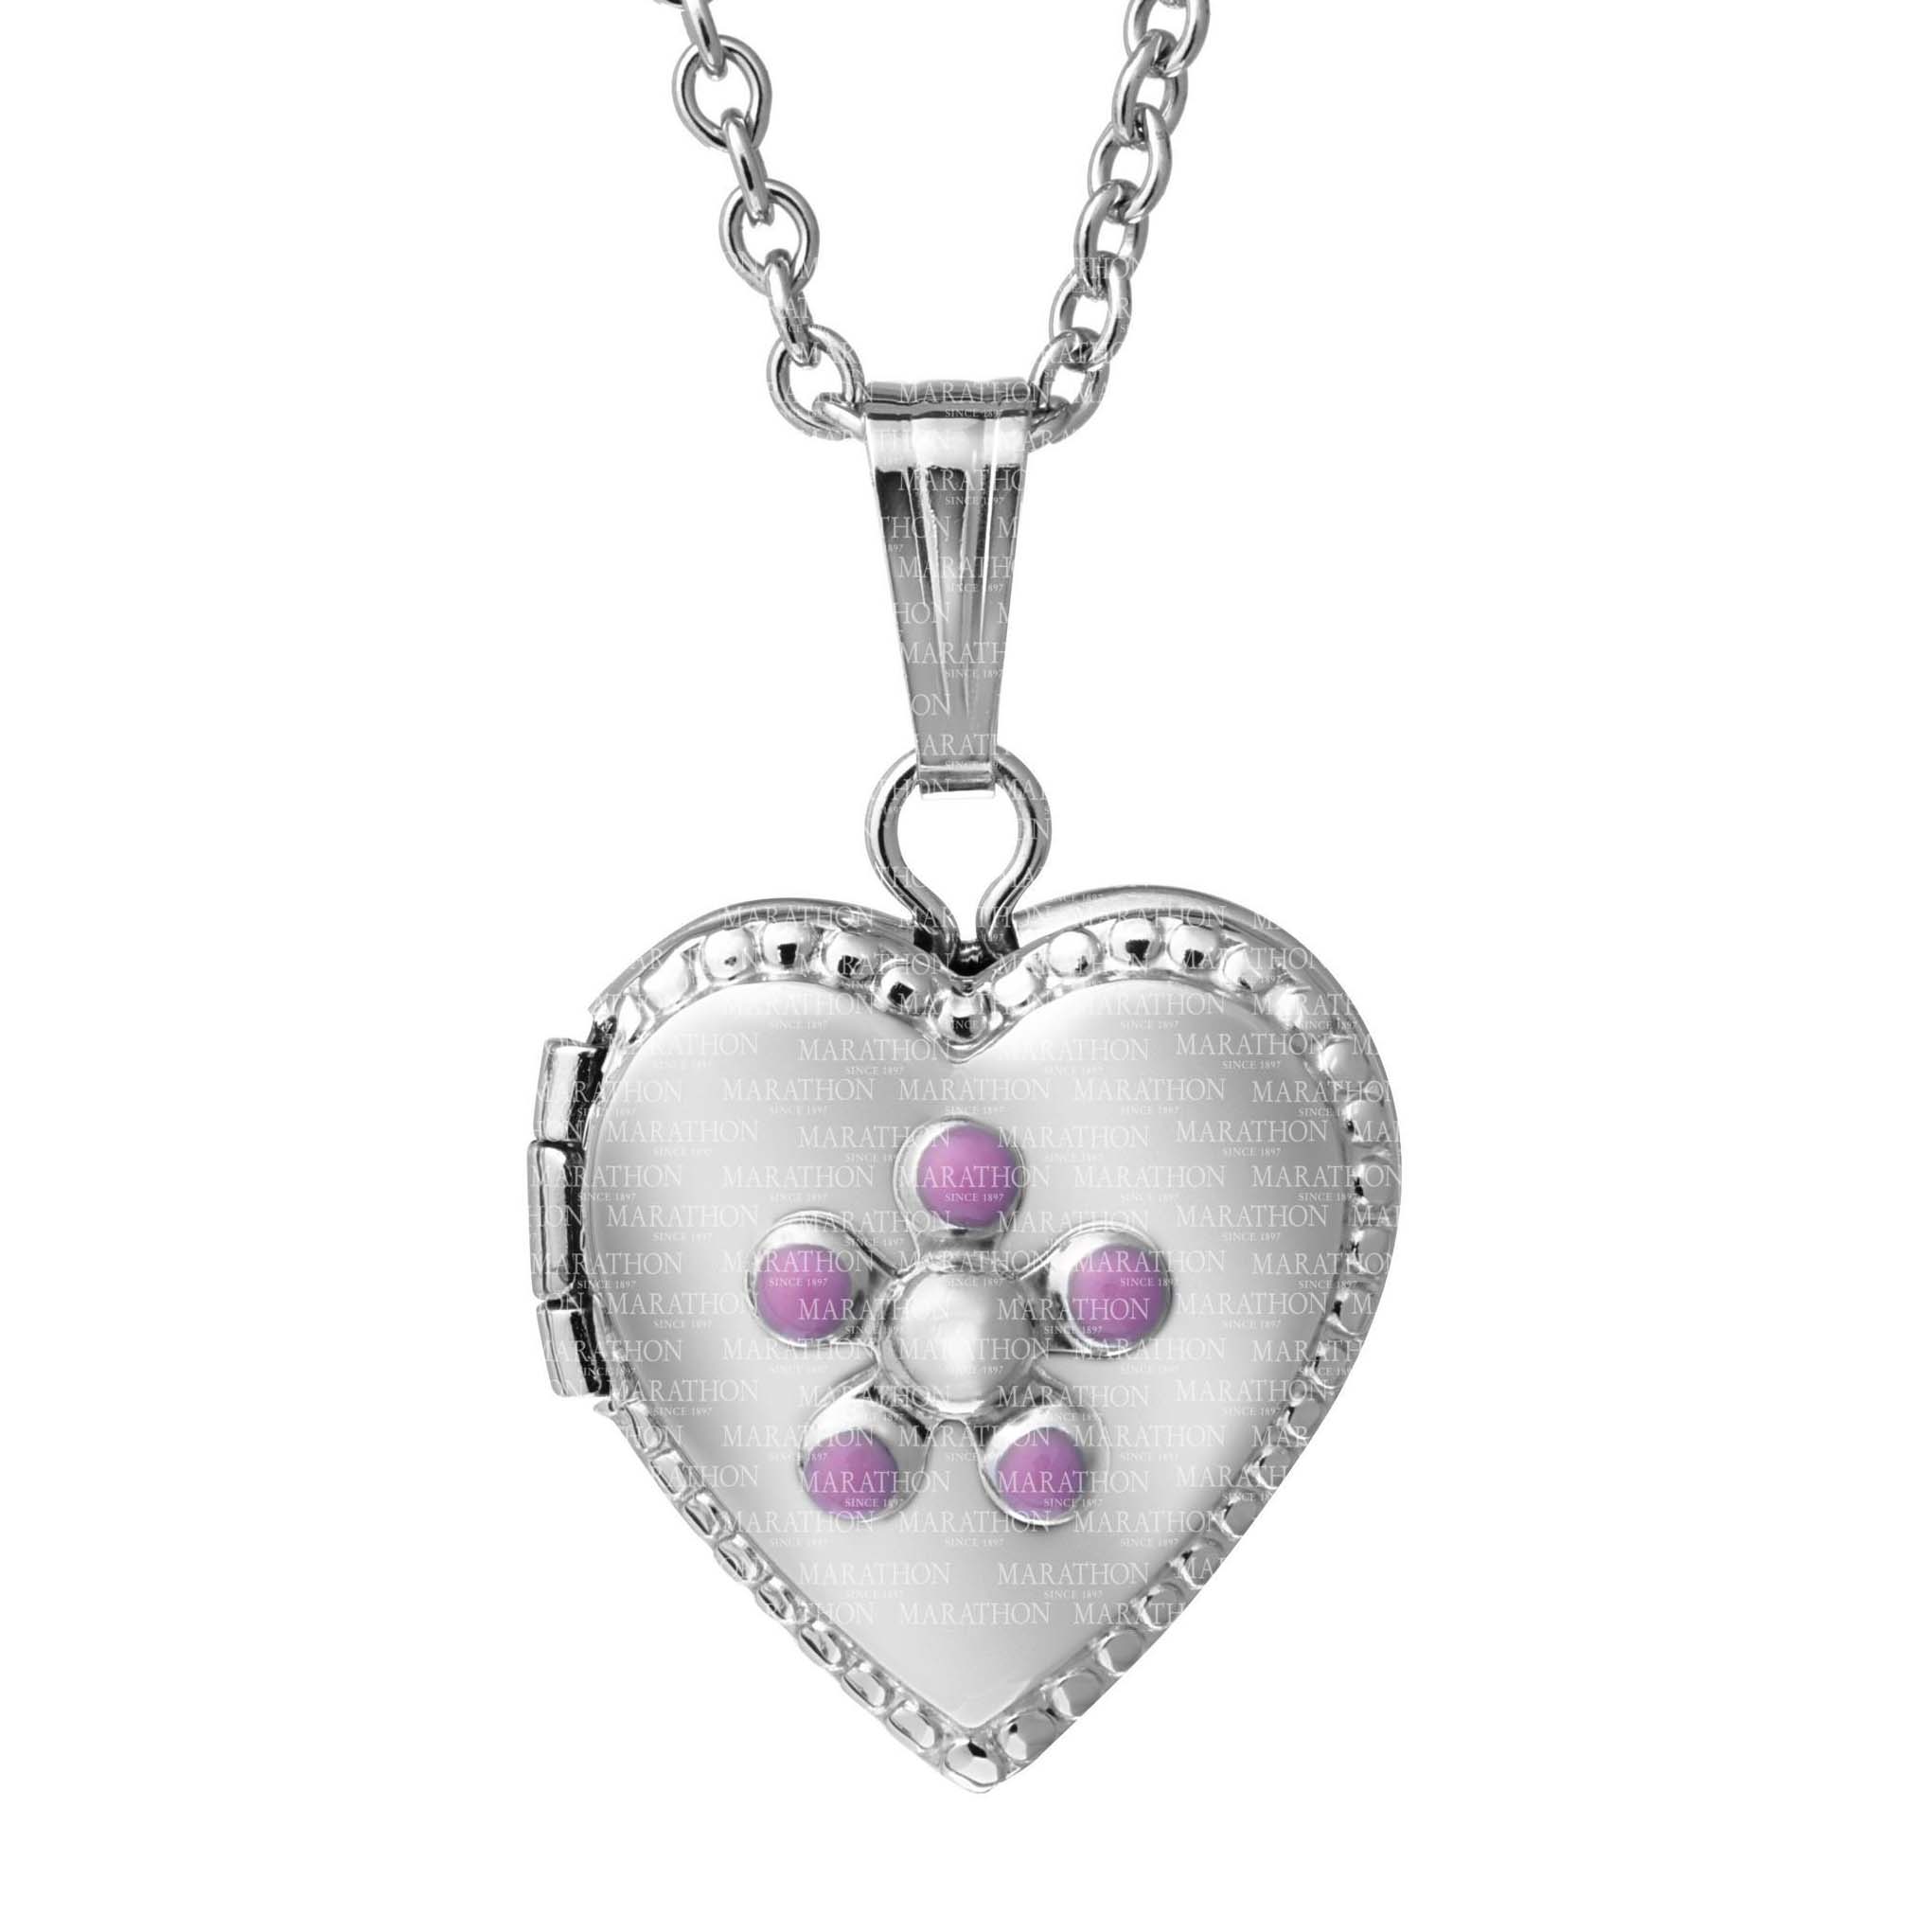 SS Floral Heart Locket. 12x18mm. 15" chain. #12358